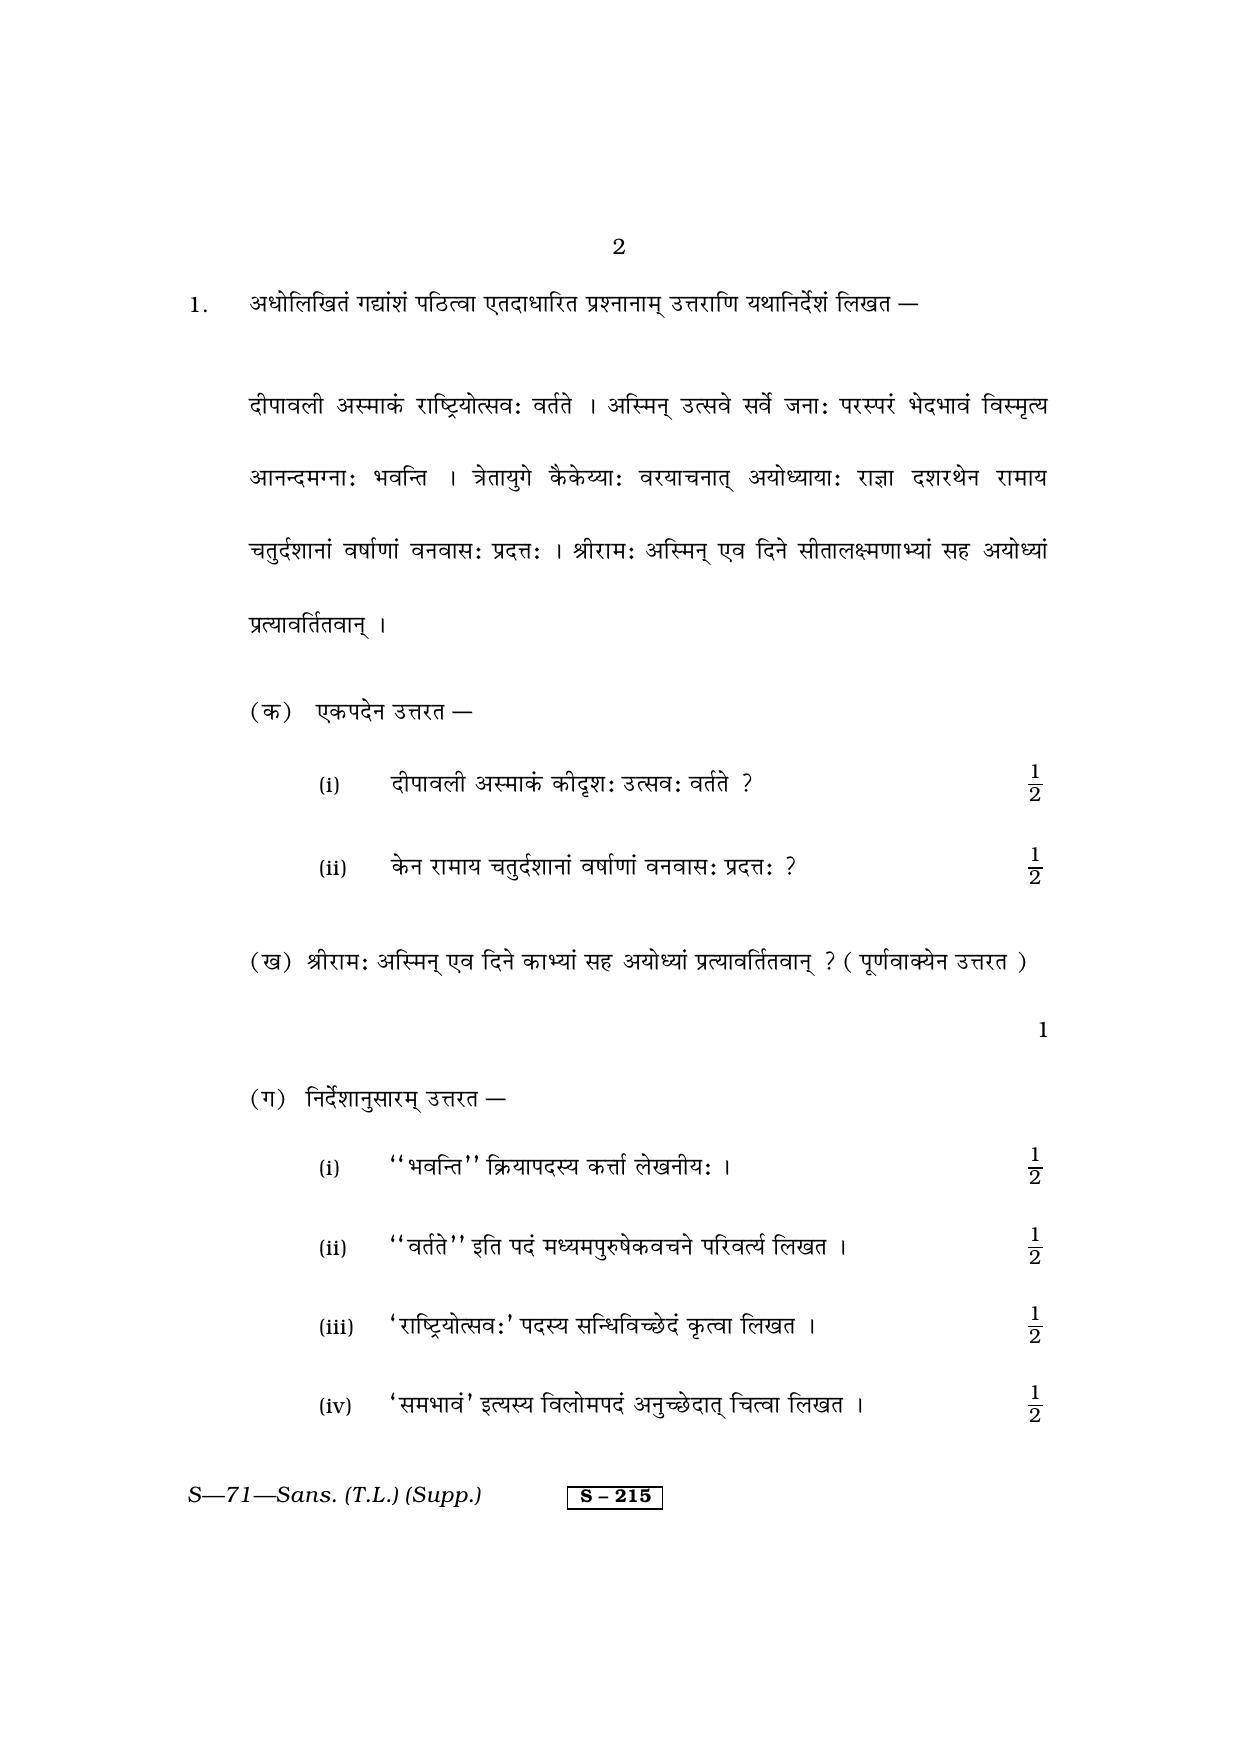 RBSE Class 10 Sanskrit (T.L.) Supplementary 2013 Question Paper - Page 2